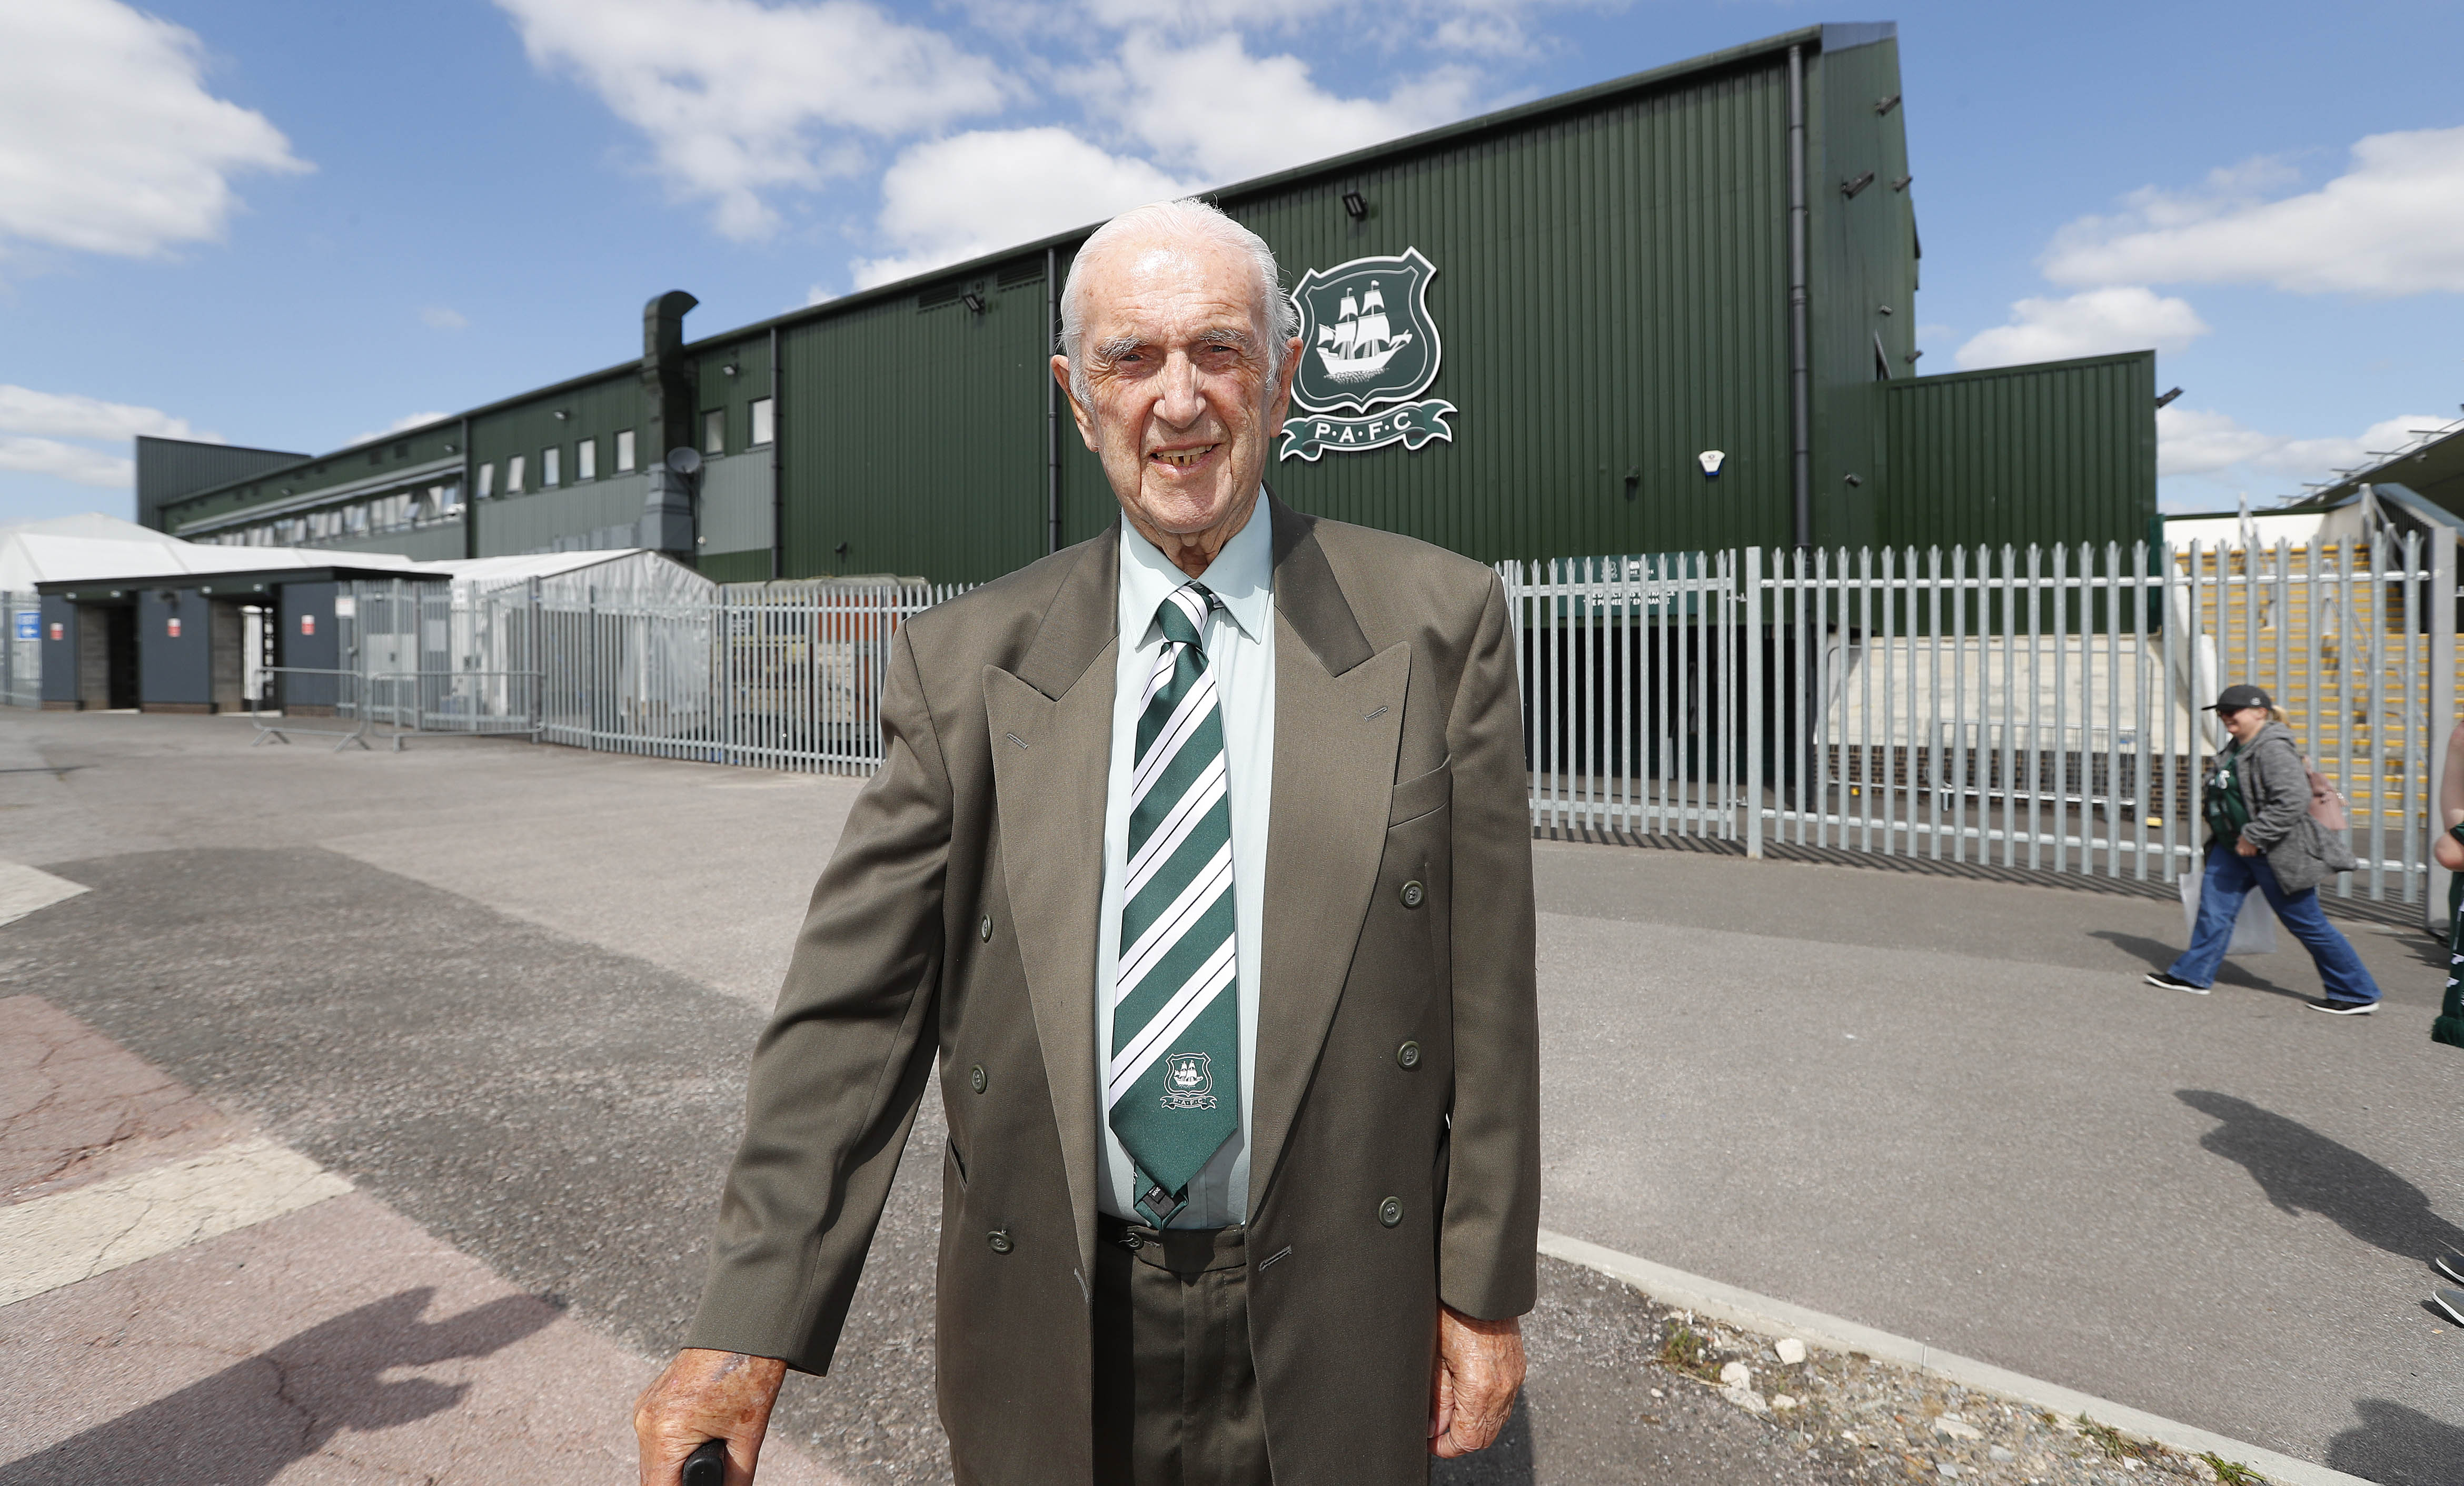 Graham Little on a recent visit to Home Park